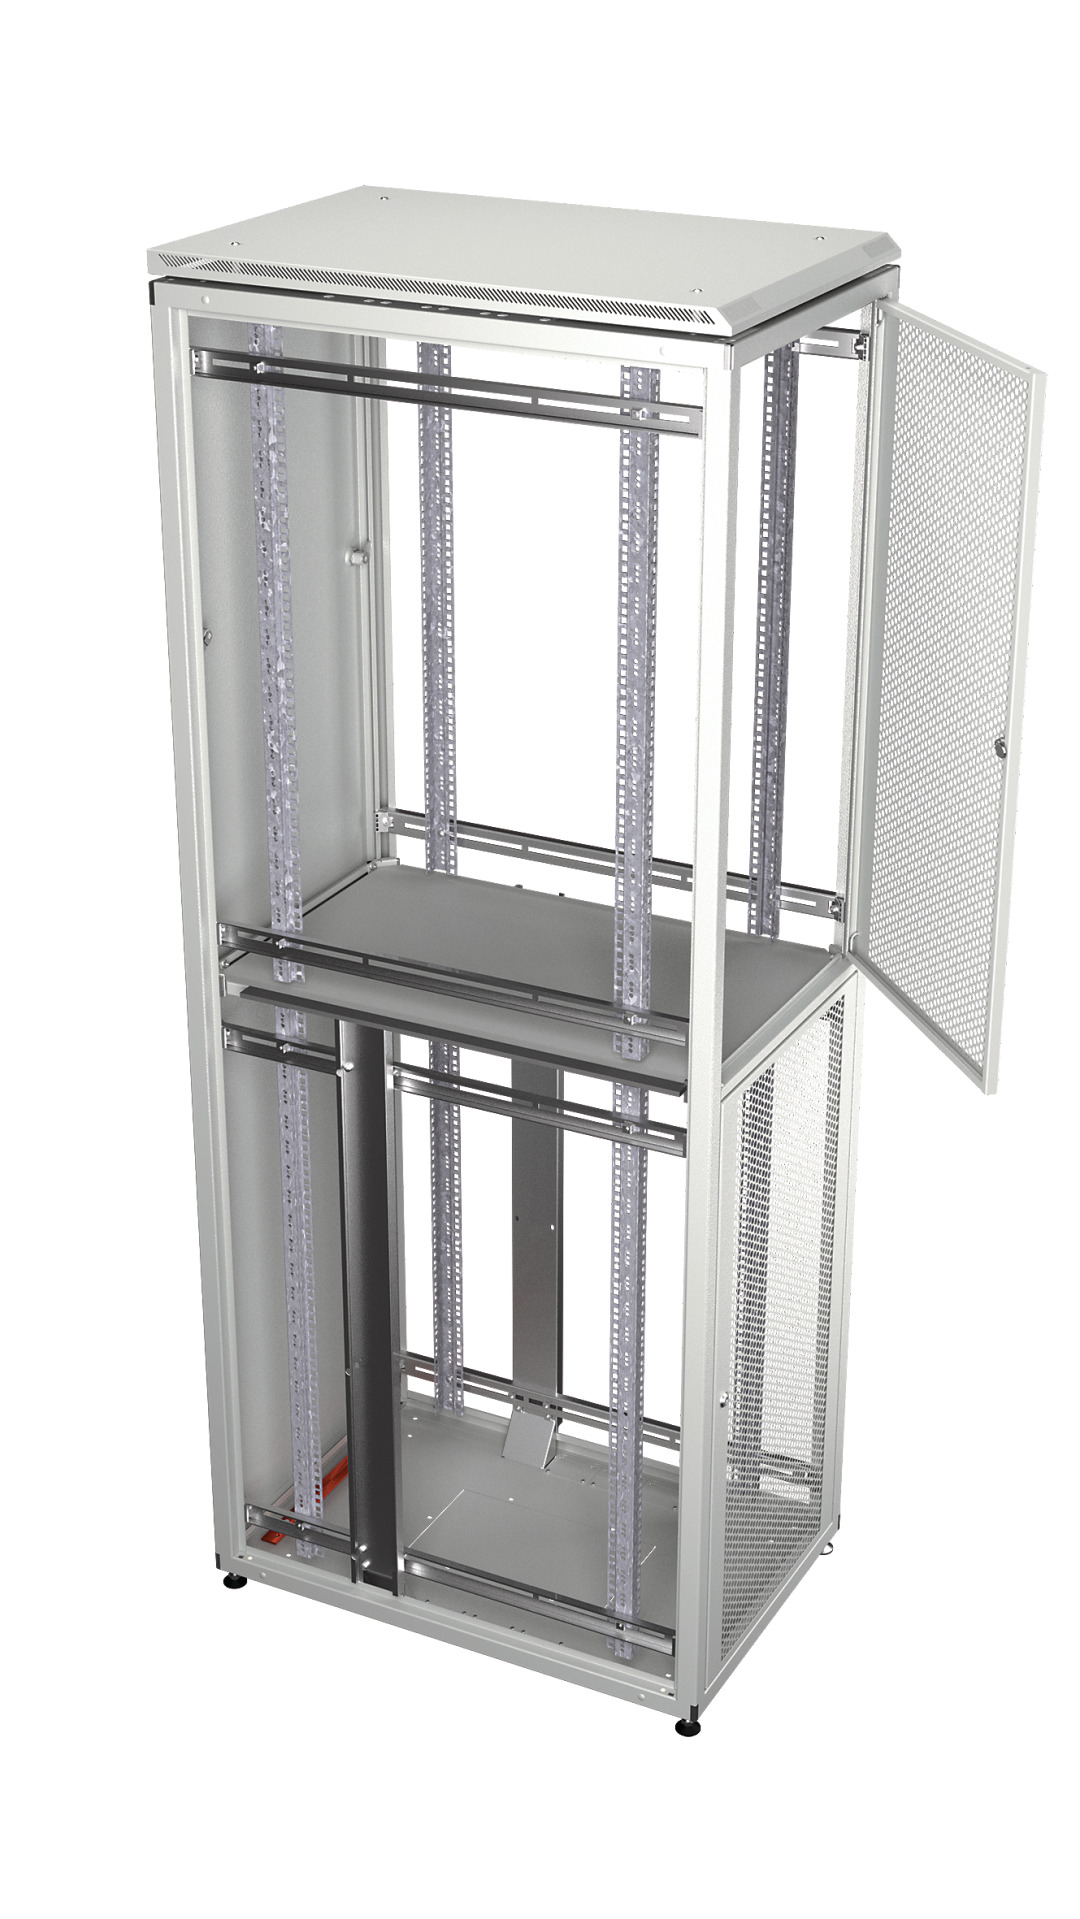 Co-Location Rack PRO, 4 x 9U, 600x1000 mm, F+R 1-Part Perforated, RAL9005